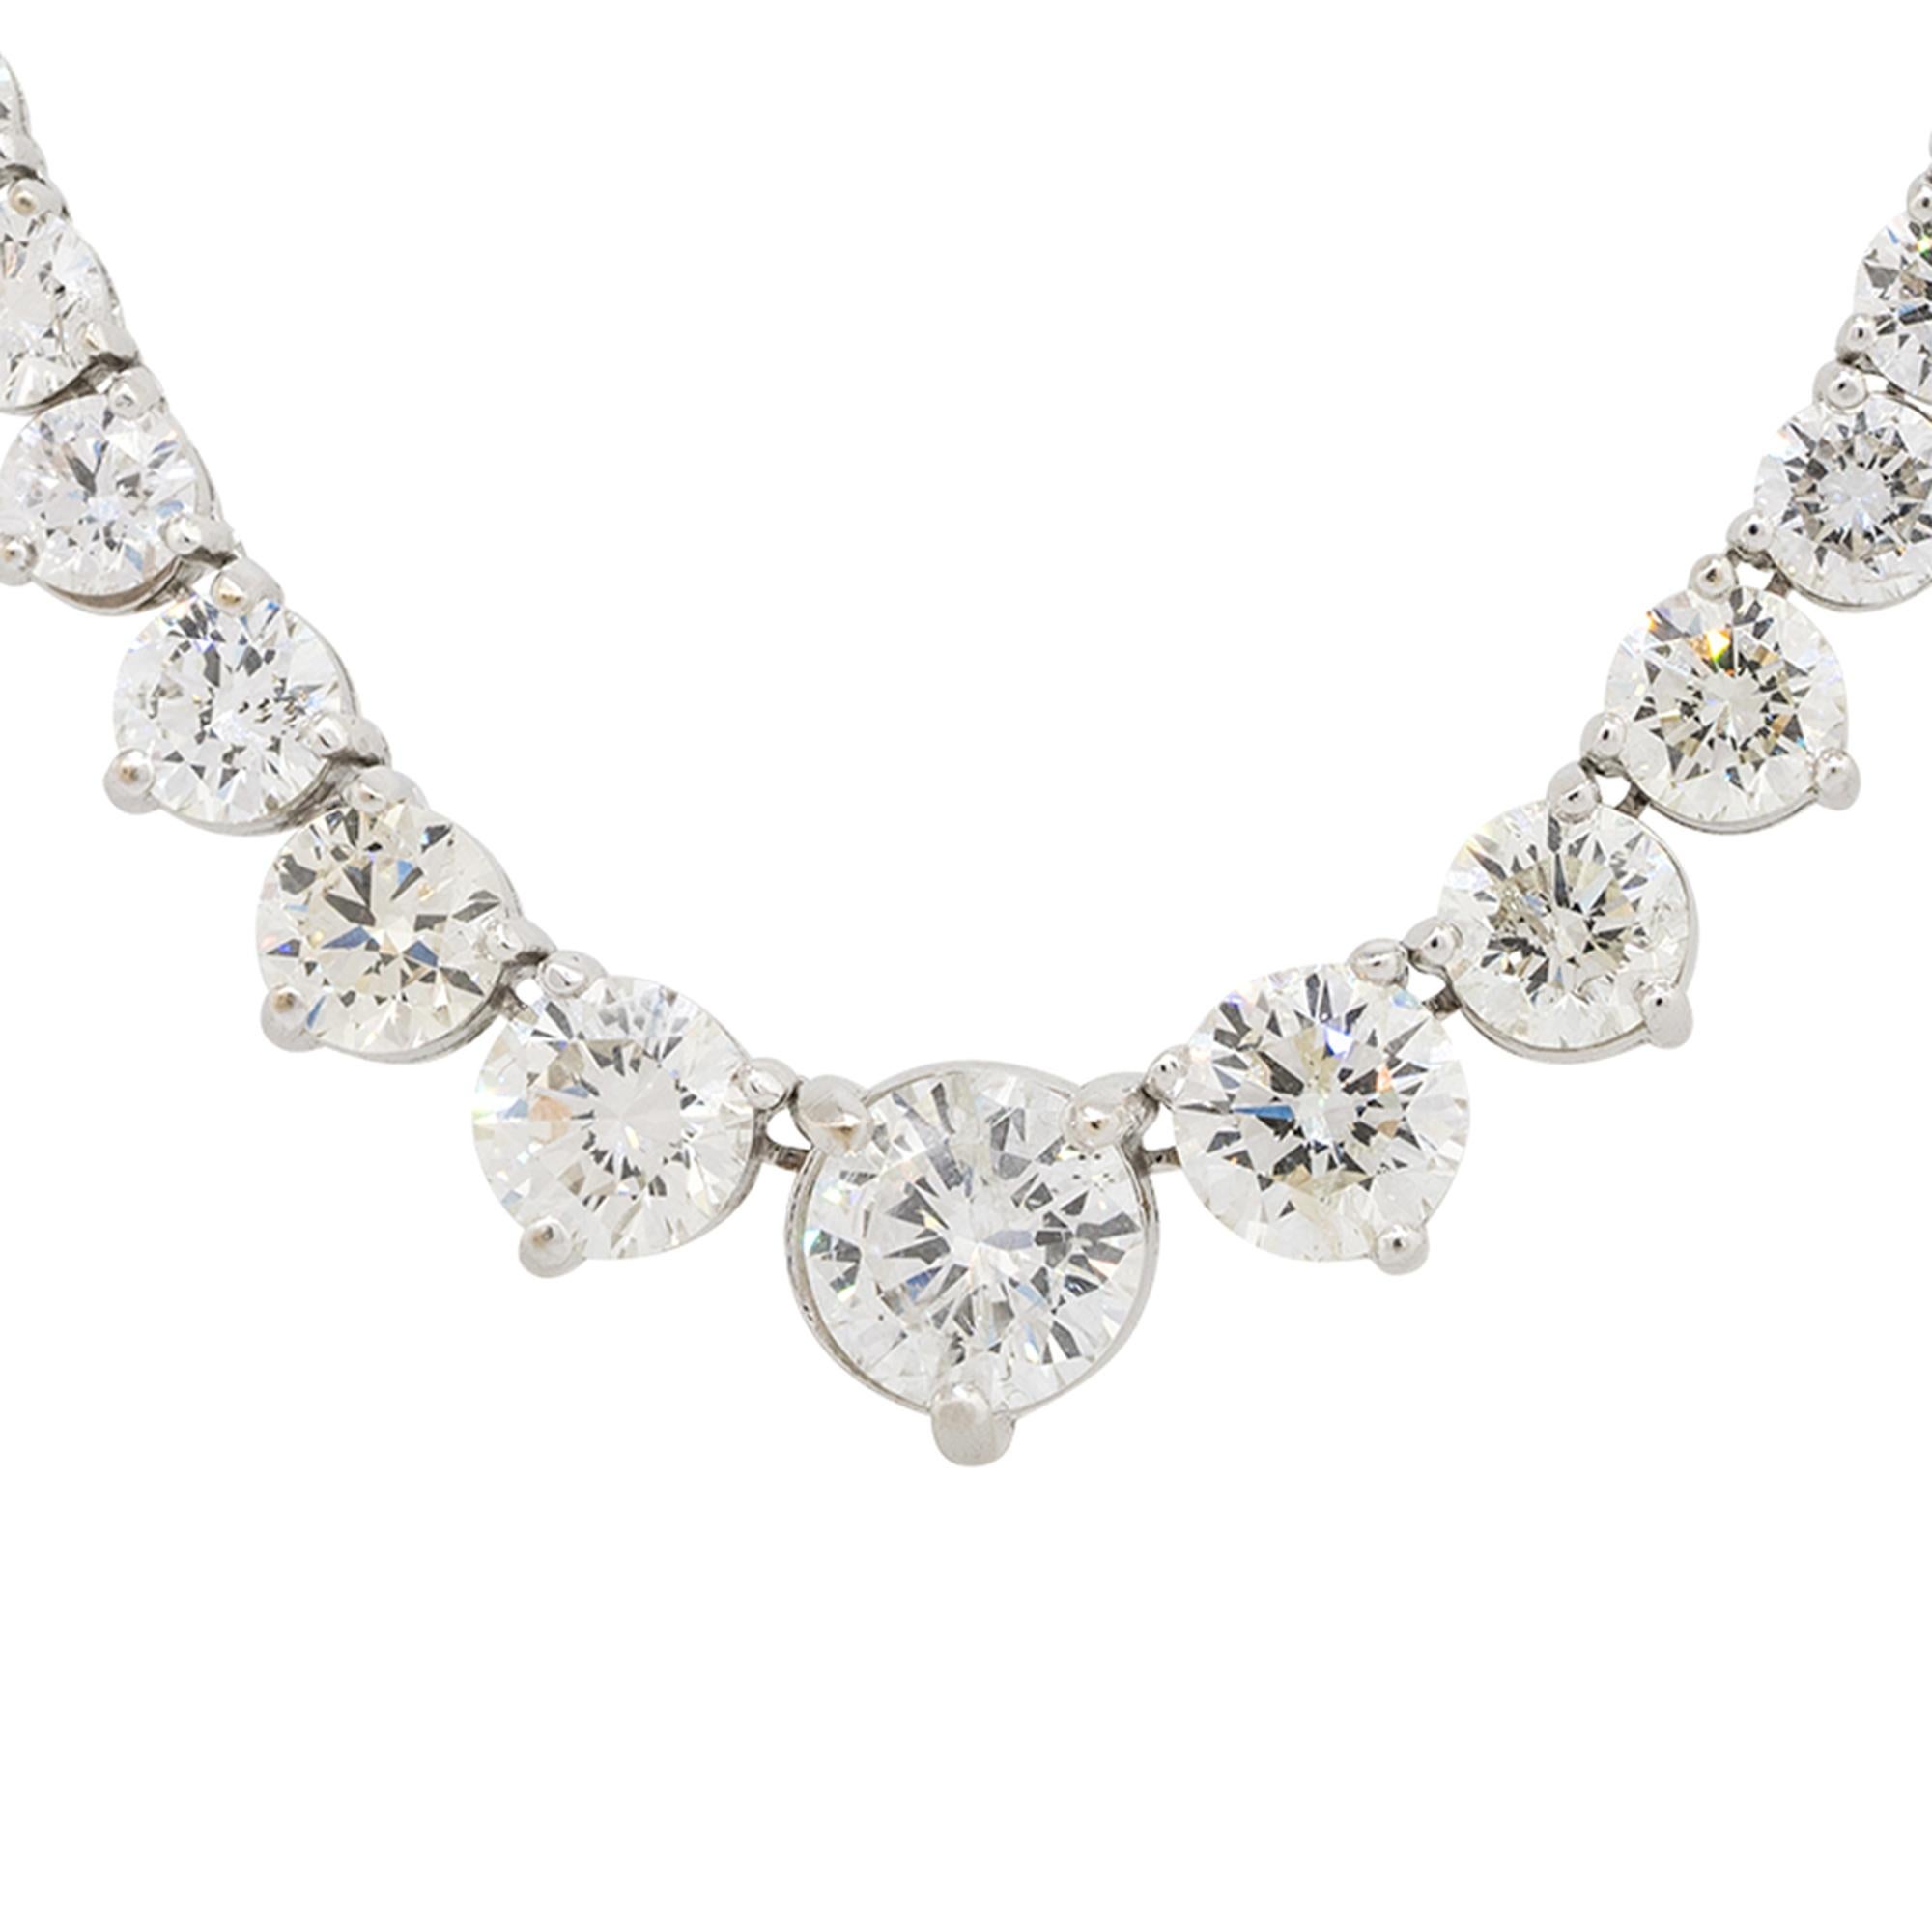 Material: 18k white gold
Diamond Details: Approx. 22ctw of round cut Diamonds. Diamonds are G/H in color and VS in clarity
Measurements: Necklace measures 17